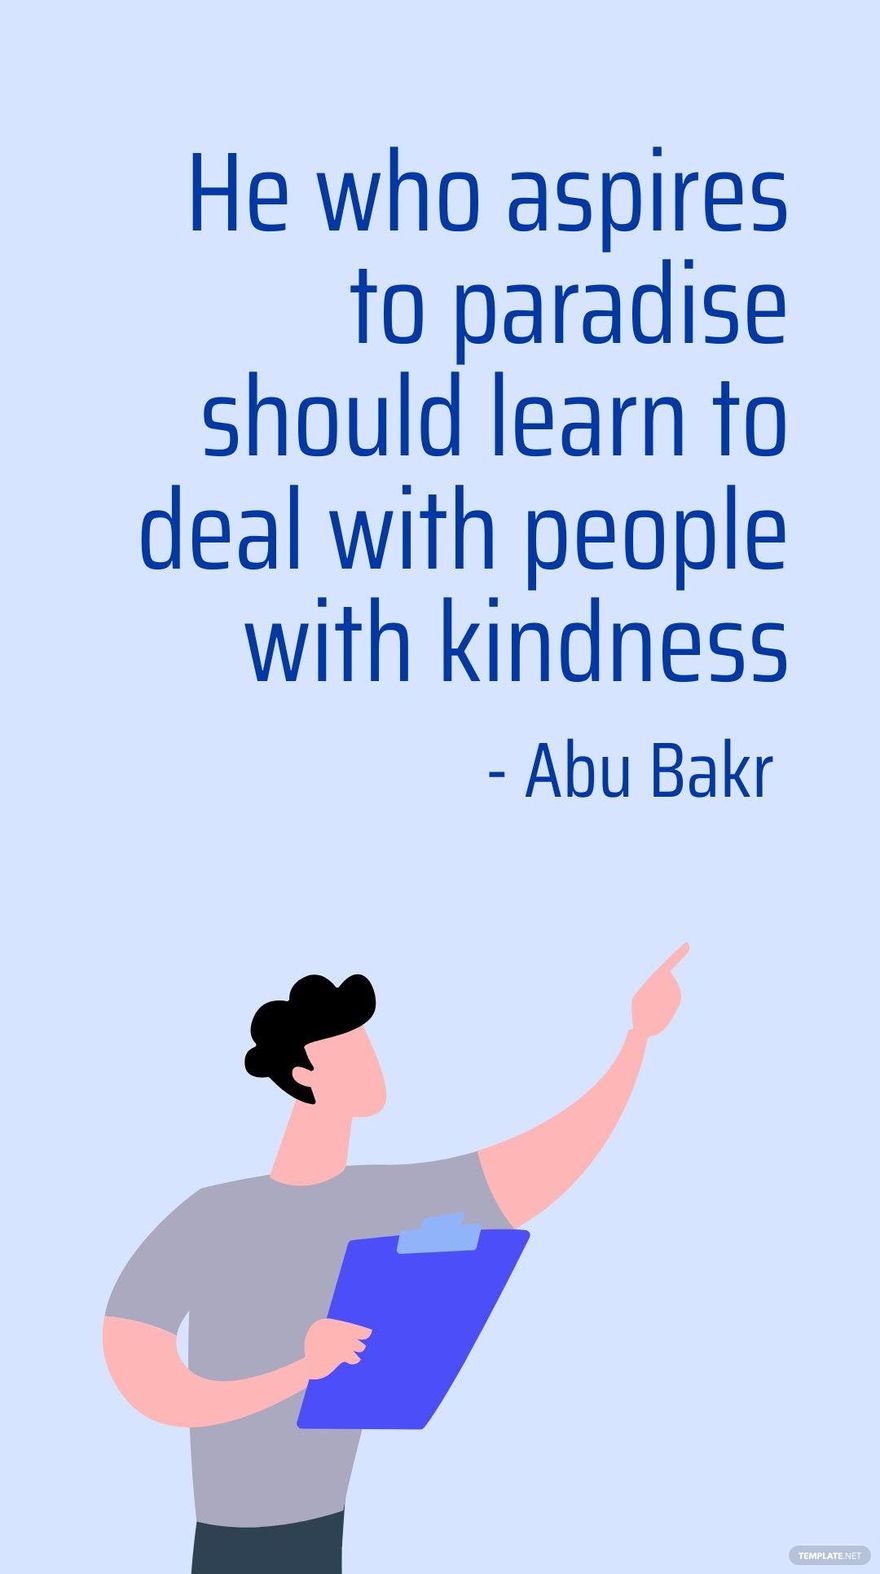 Abu Bakr - He who aspires to paradise should learn to deal with people with kindness in JPG